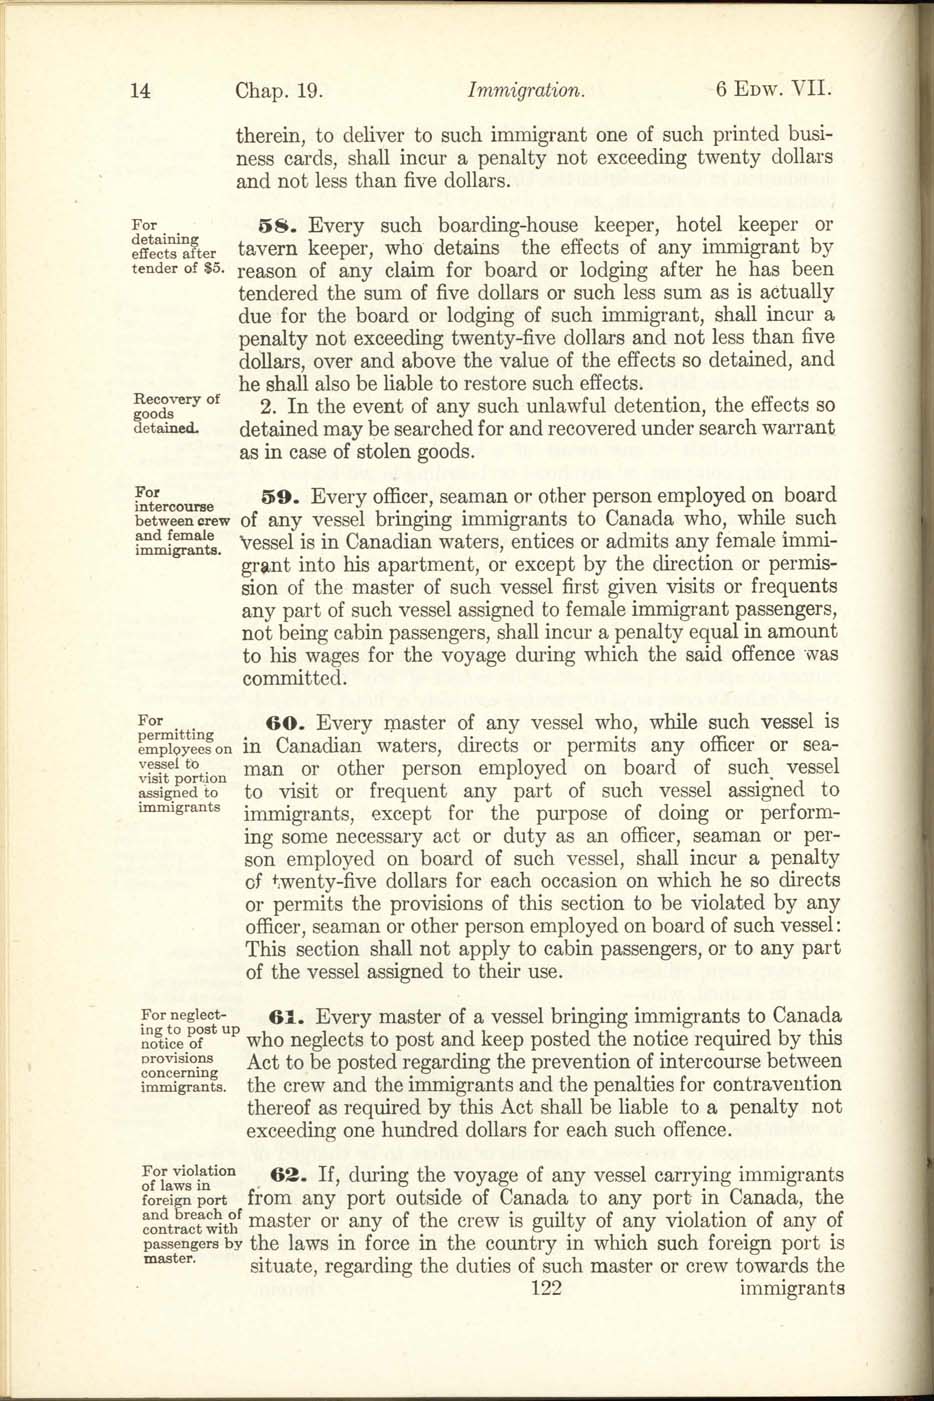 Chap. 19 Page 122 Immigration Act, 1906